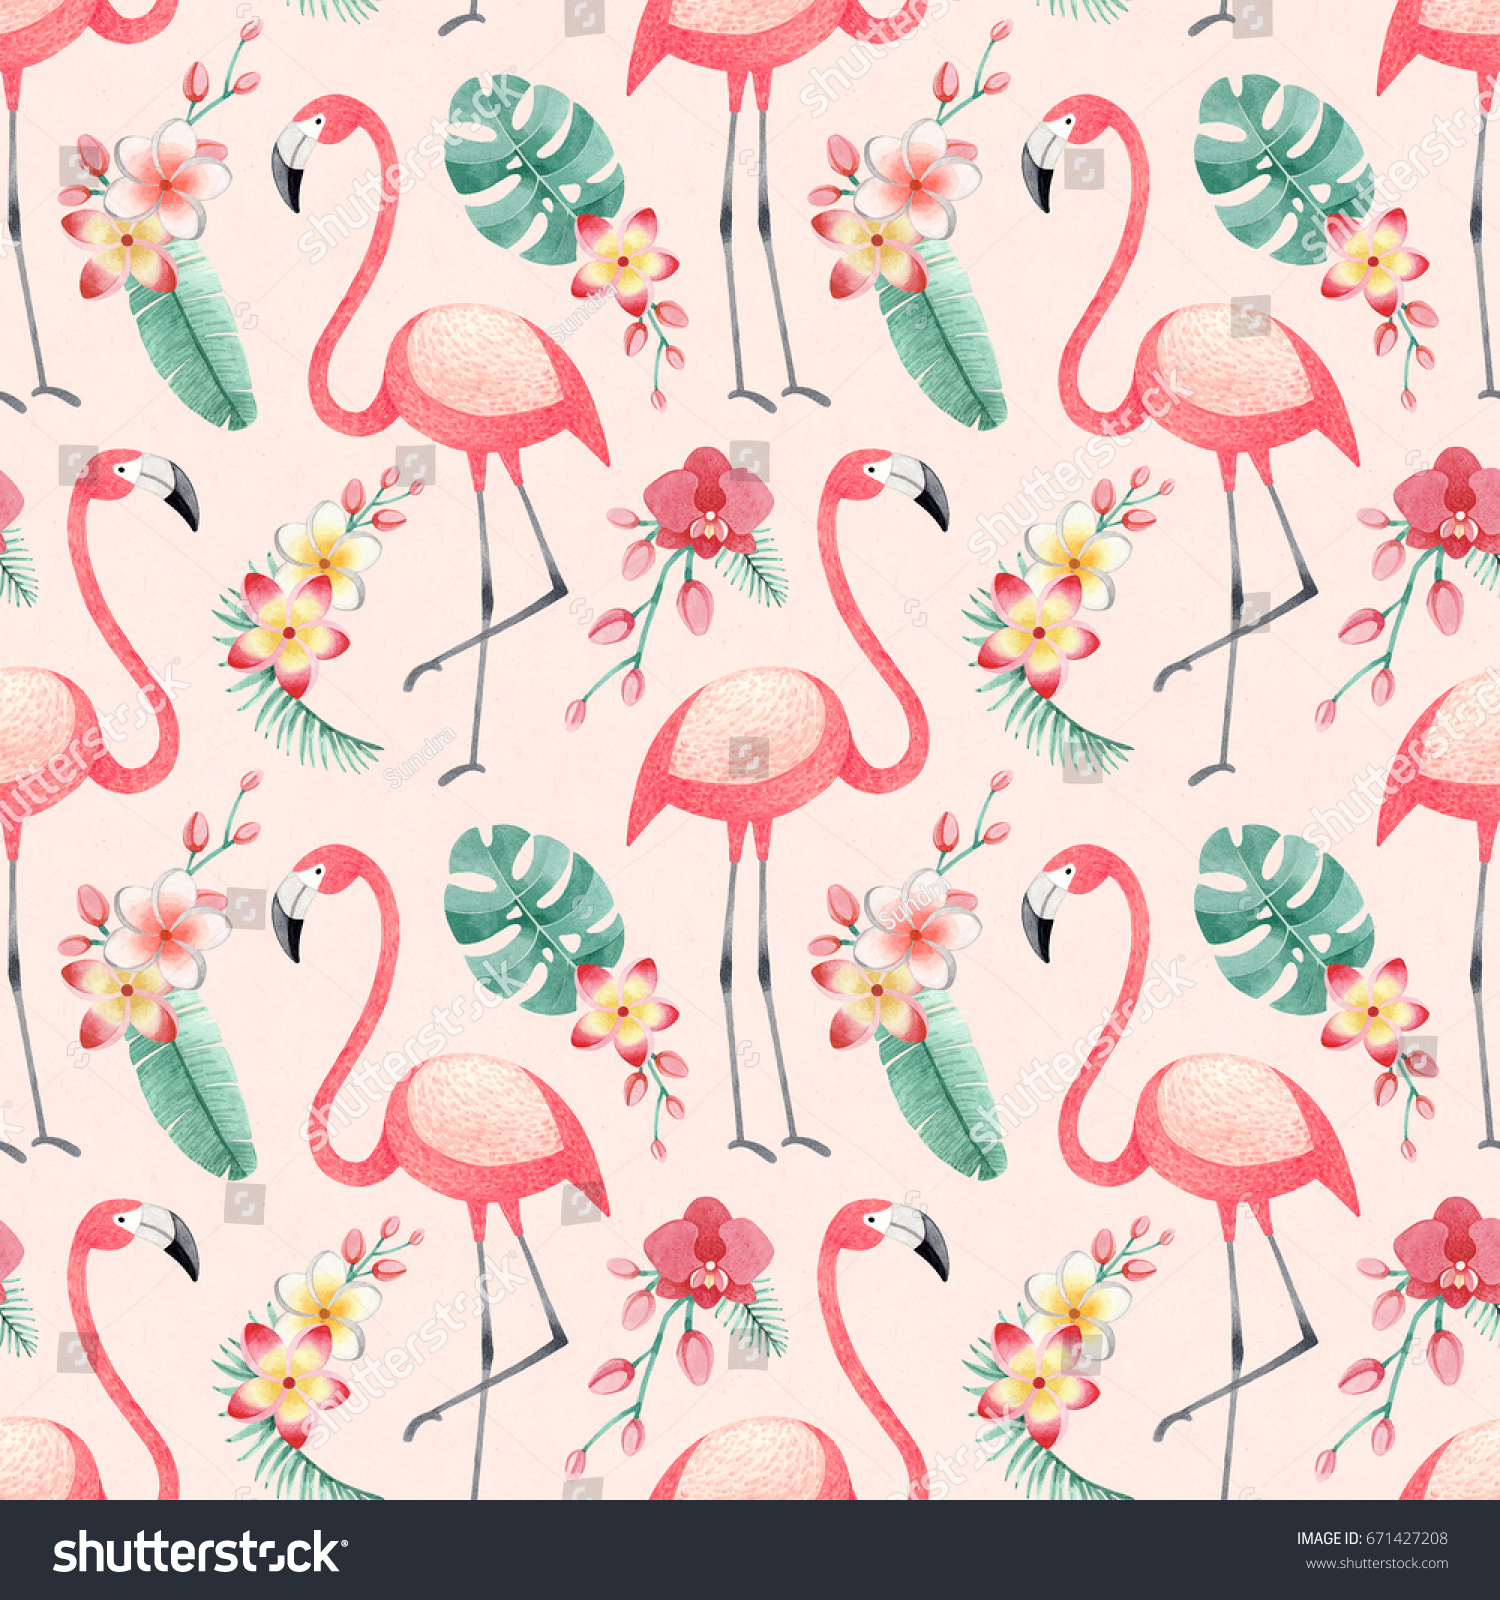 Watercolor Illustrations Flamingos Tropical Flowers Leaves Stock ...